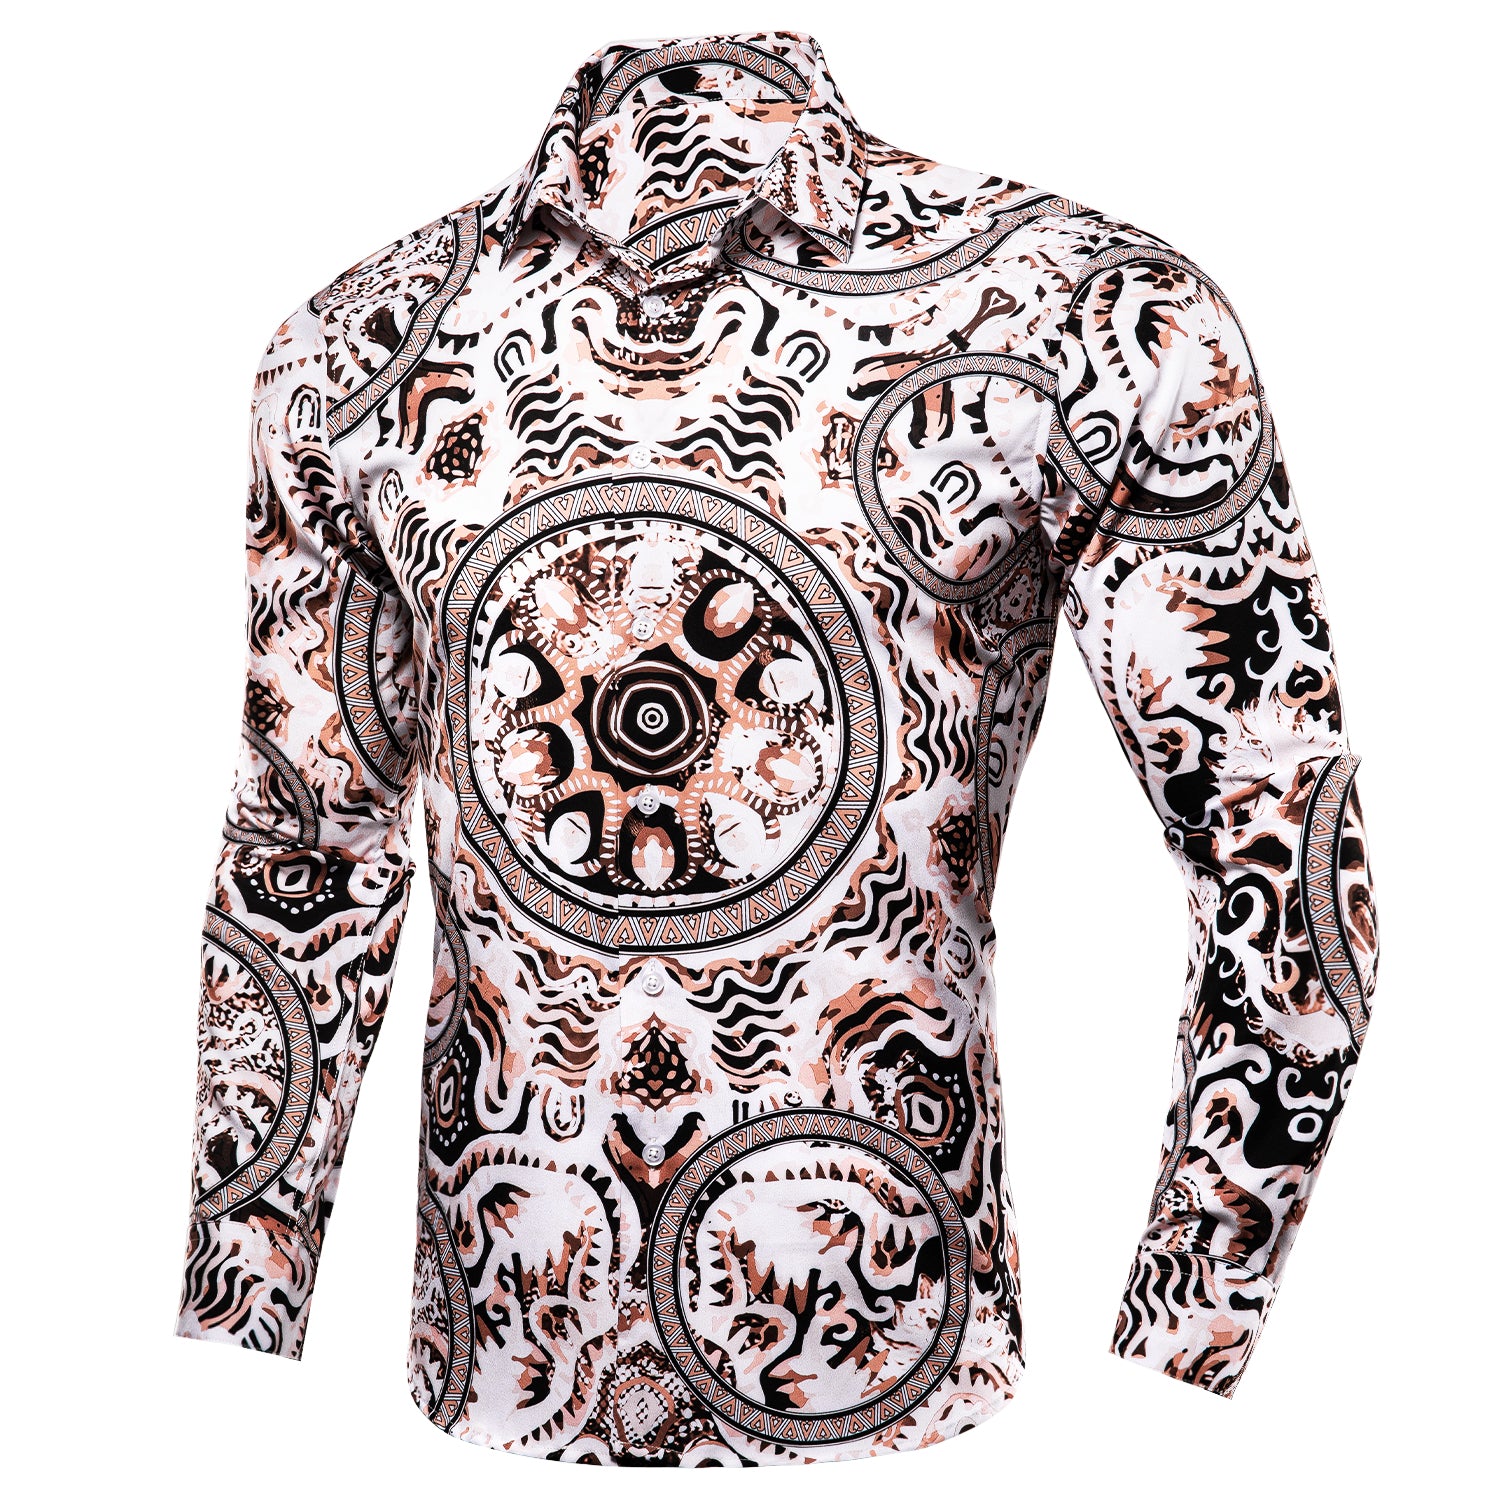 Clearance Sale New White Brown Curcle Print Novelty Men's Shirt